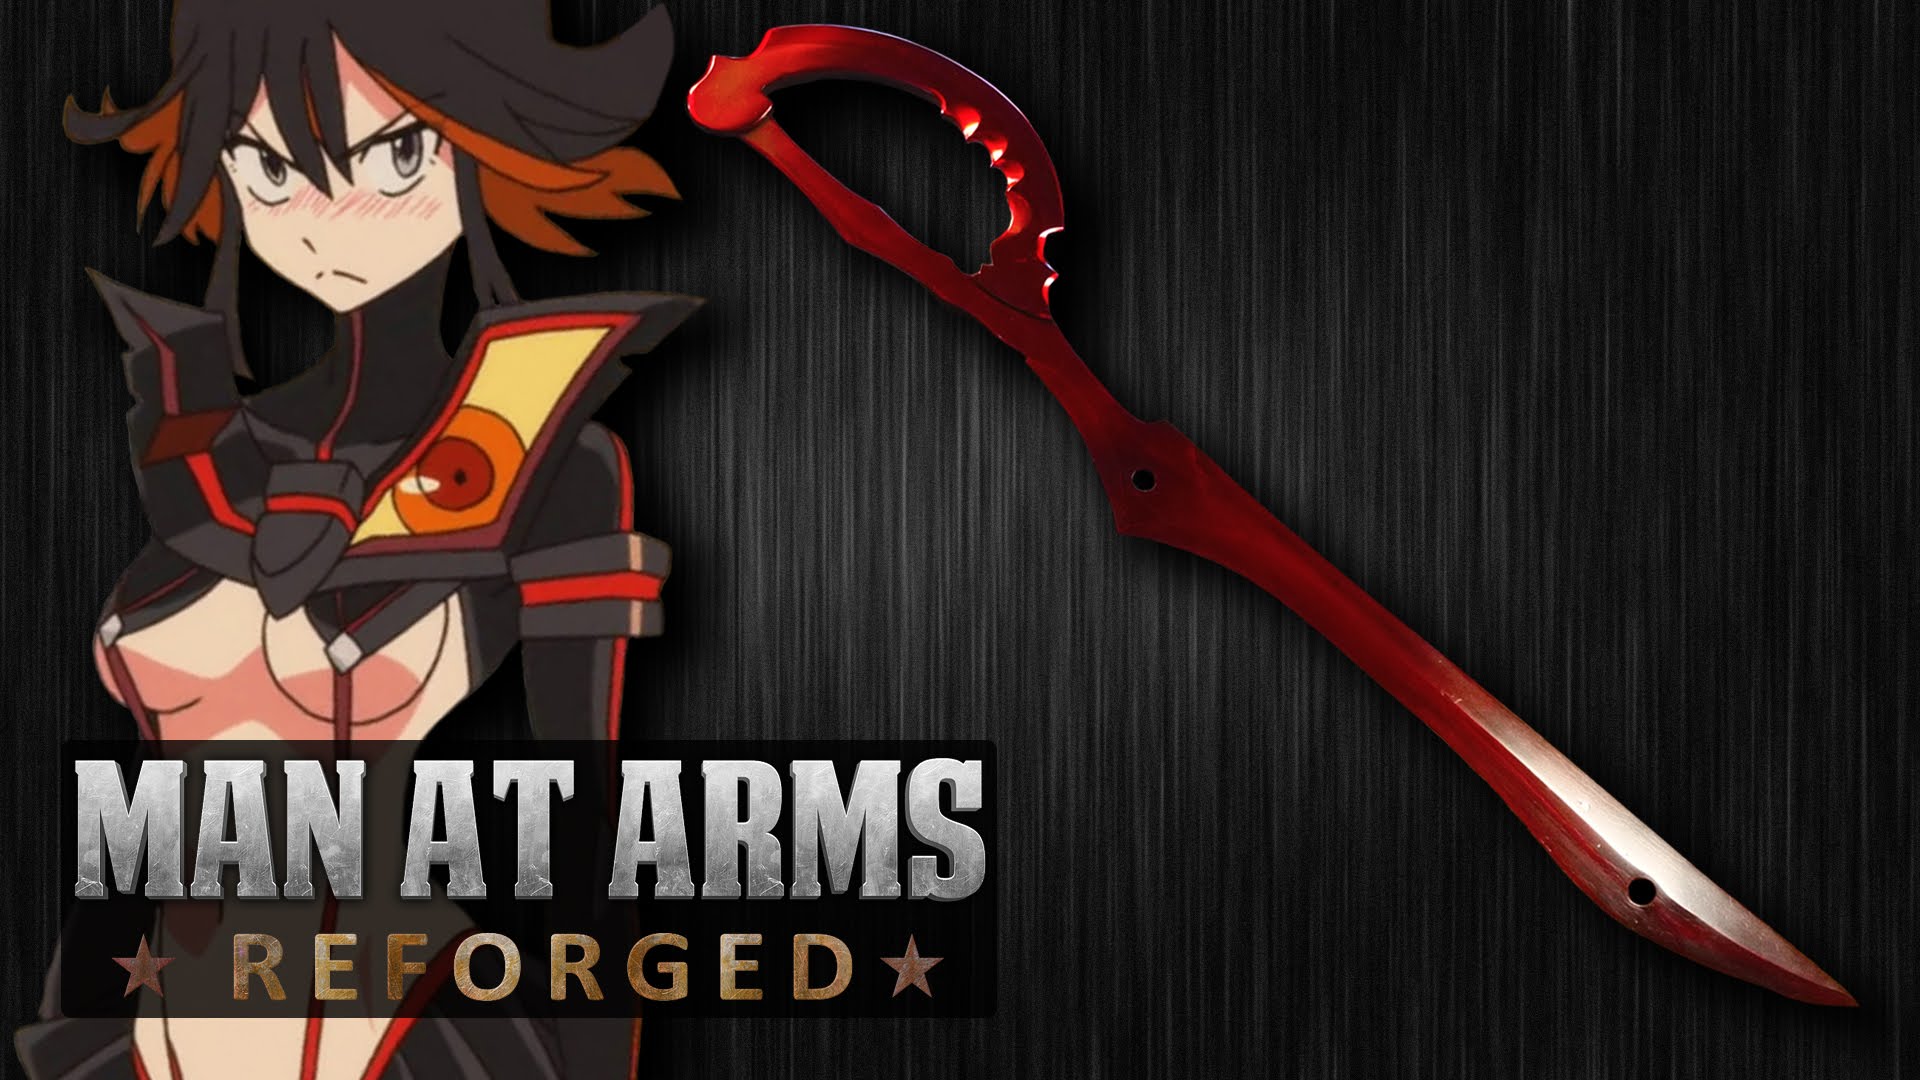 Man at Arms: Reforged' Forges the Scissor Blade From the Popular Anime...